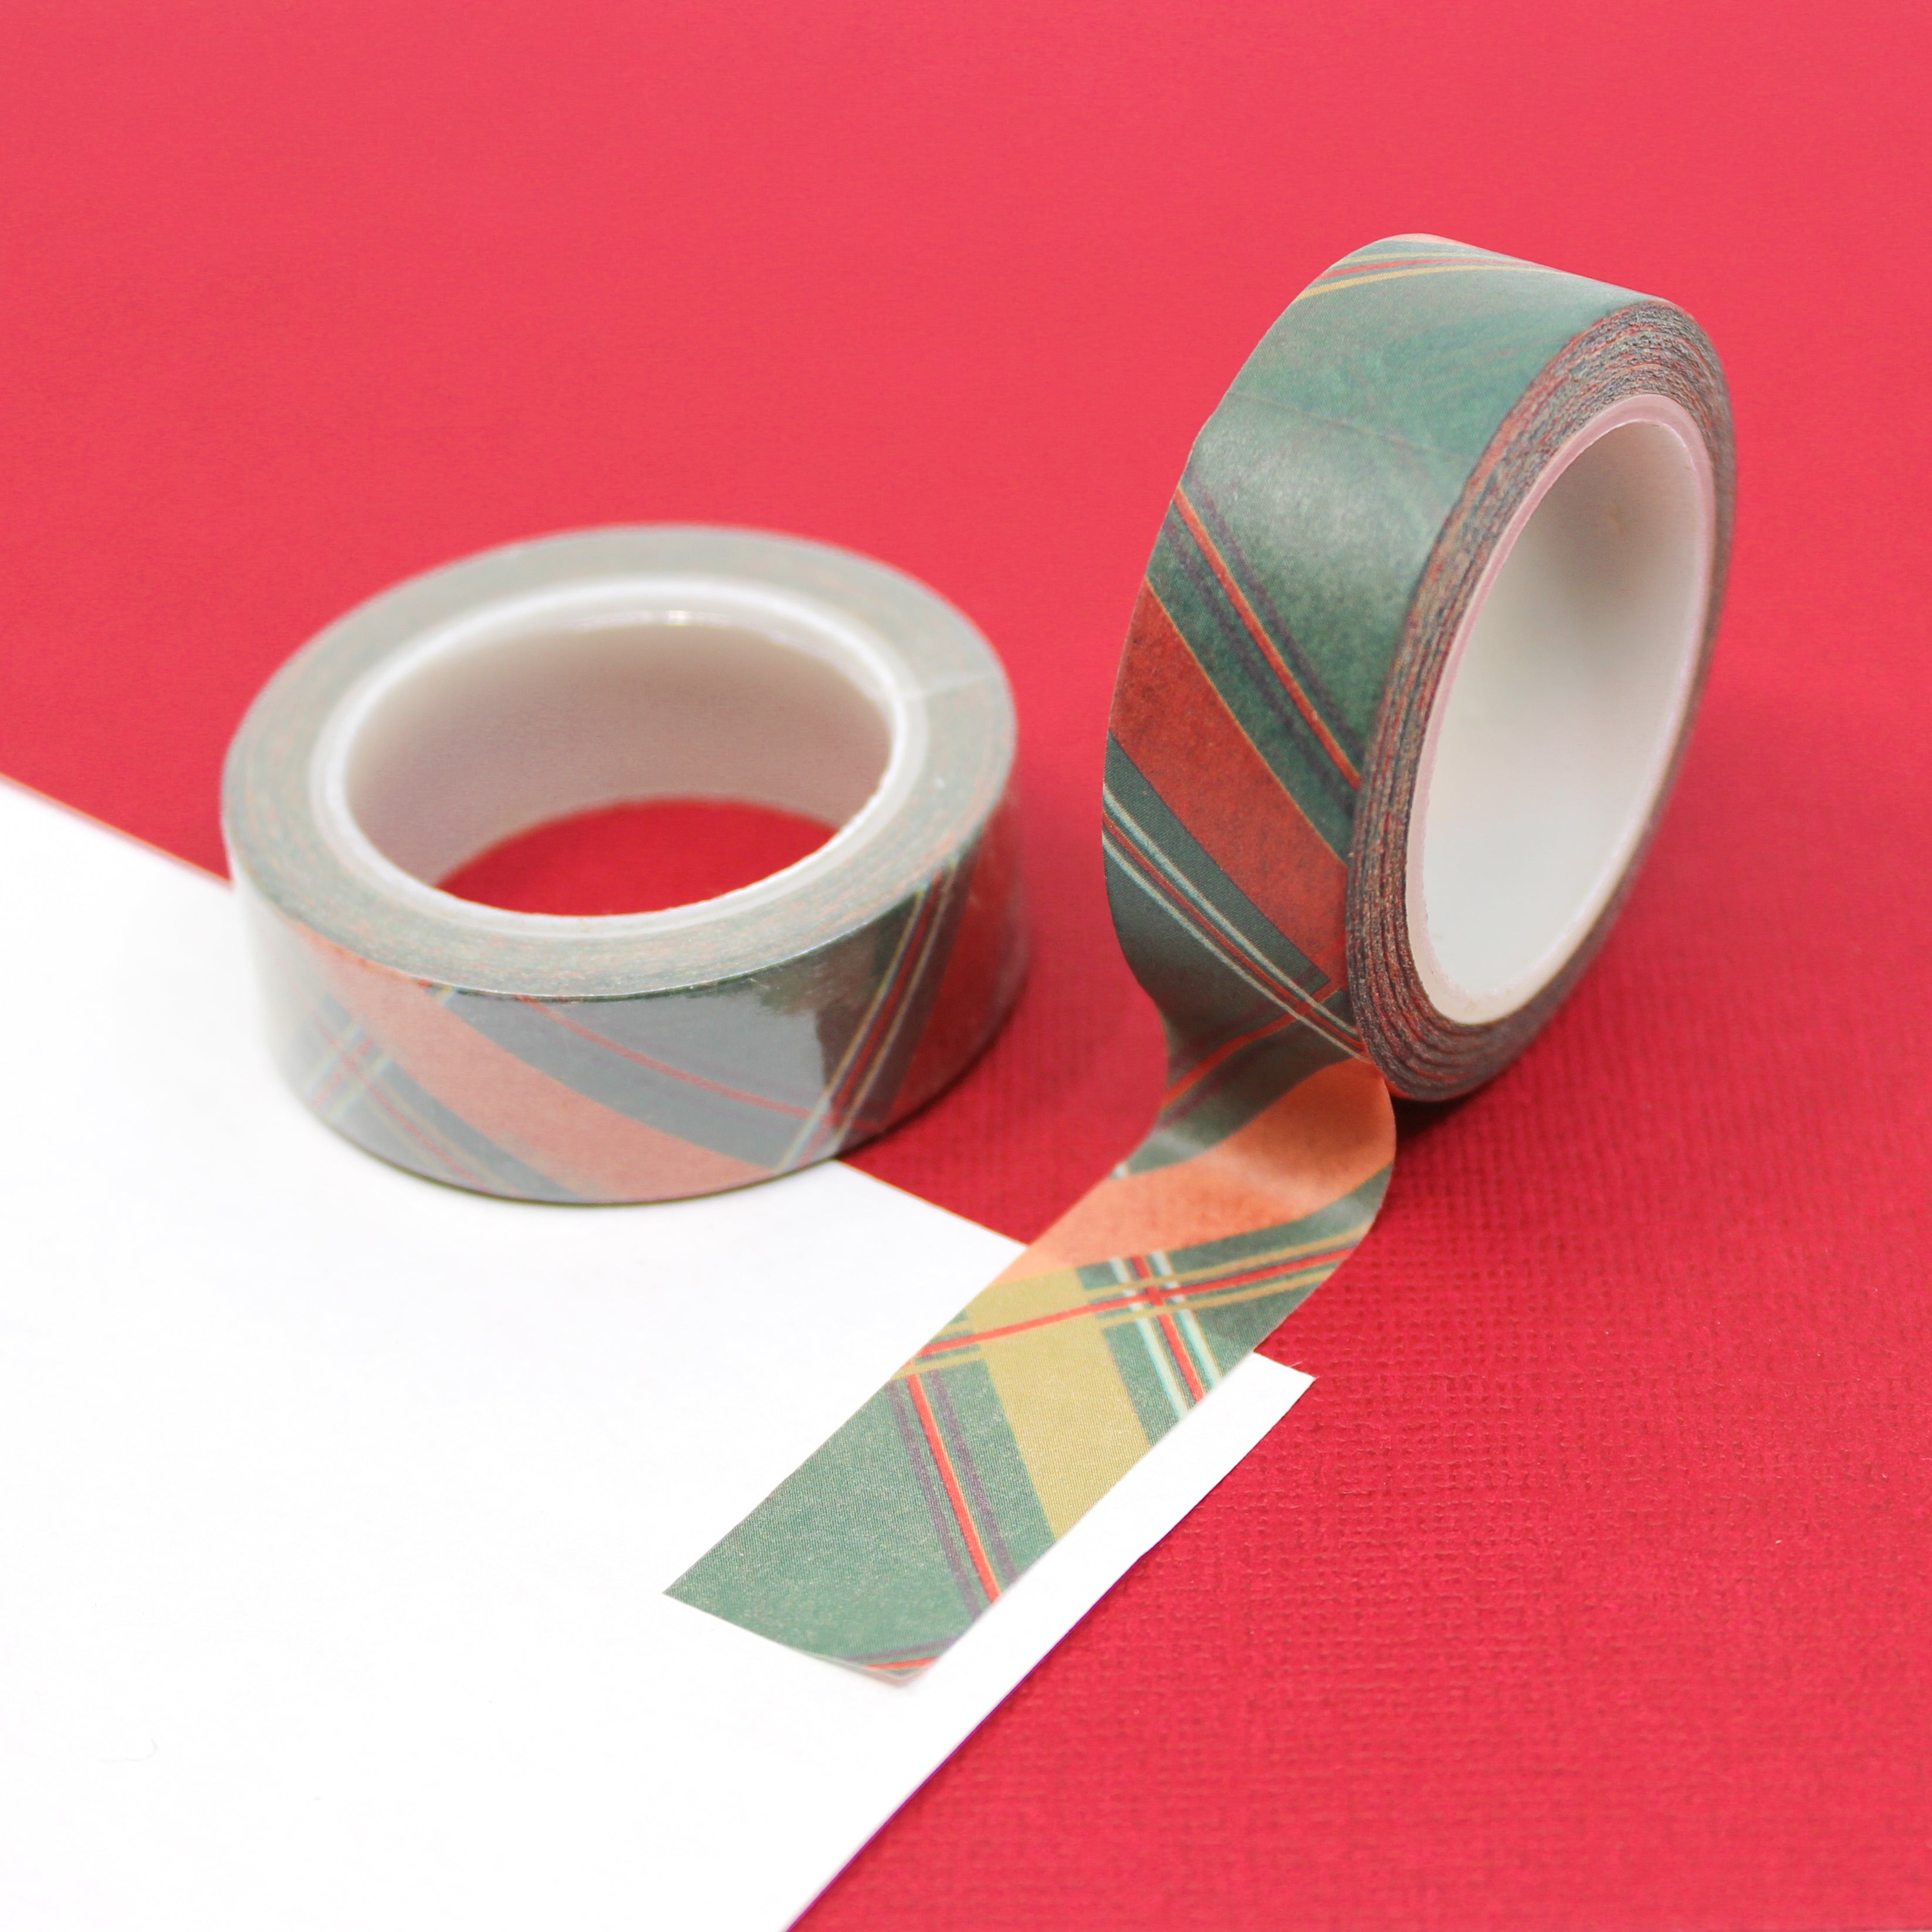 This is a red and green Holiday plaid view themed washi tape from BBB Supplies Craft Shop